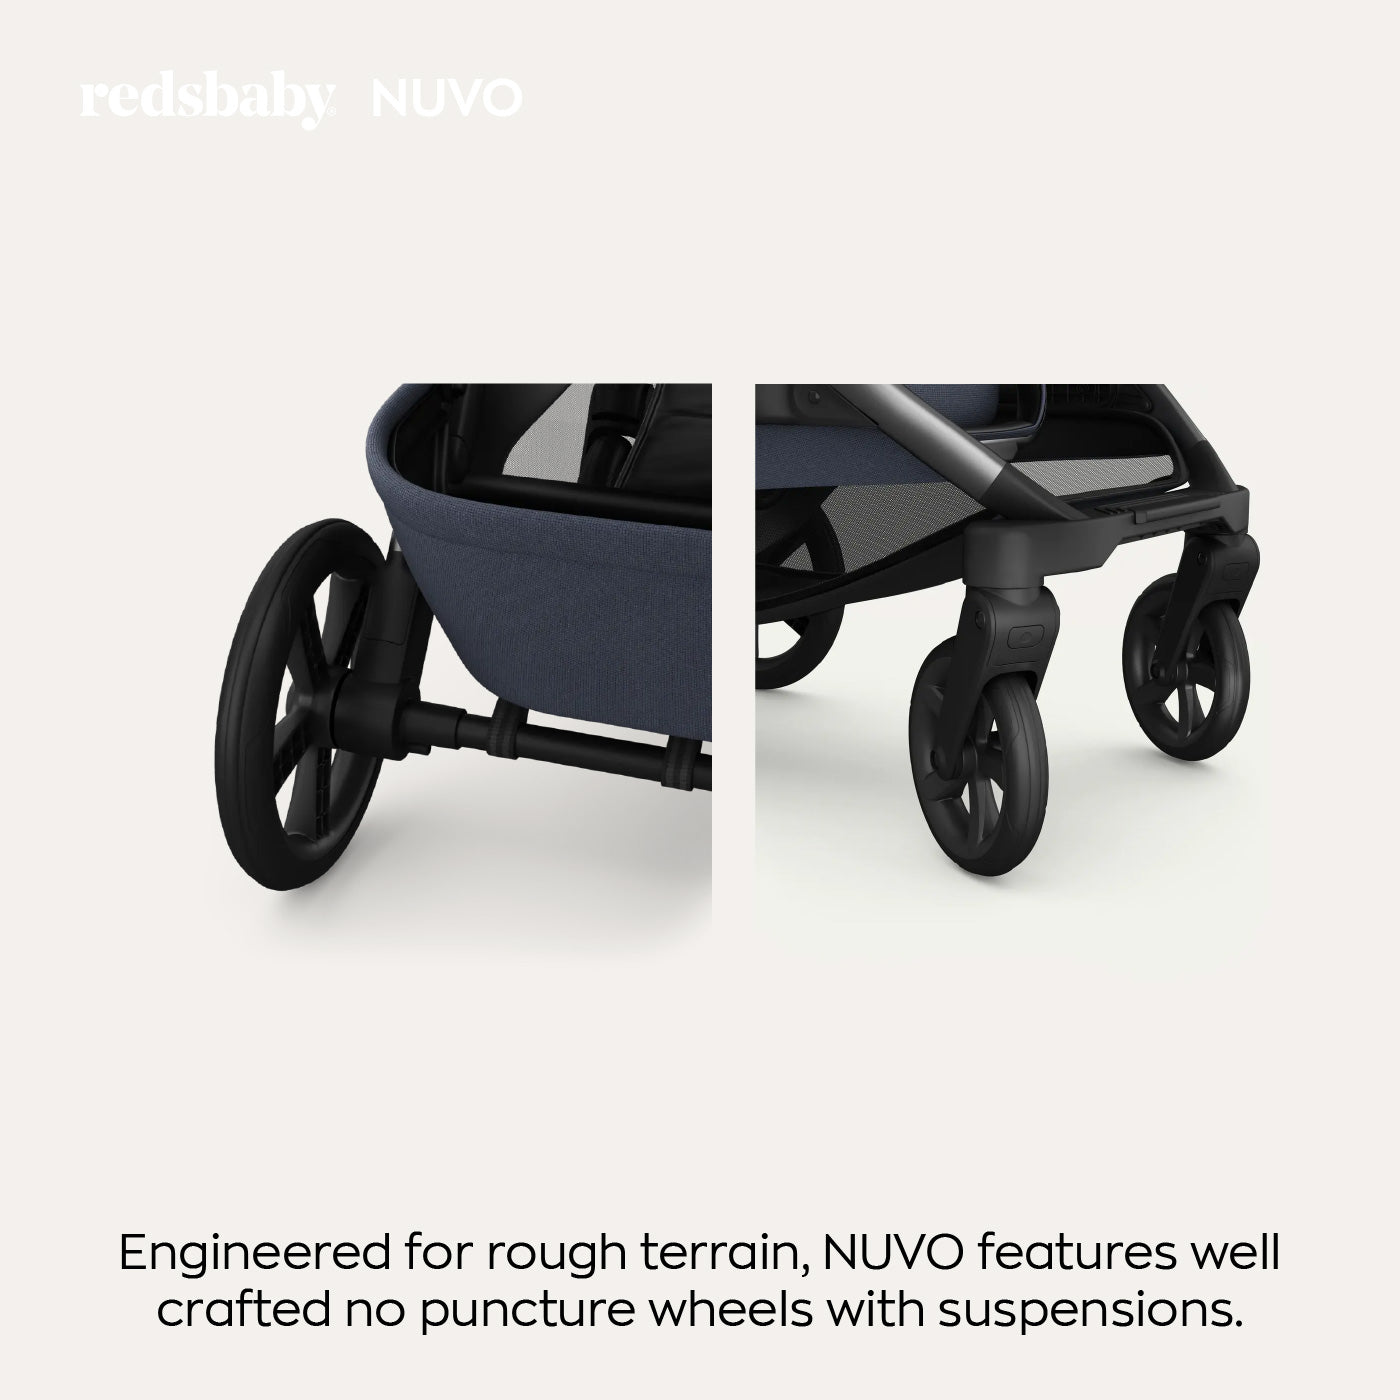 Detail image showing the wheels and lower frame of a navy blue stroller with the text "reds baby NUVO. Engineered for rough terrain, NUVO features well-crafted no puncture wheels with suspensions." The focus is on the robust wheels and suspension system.